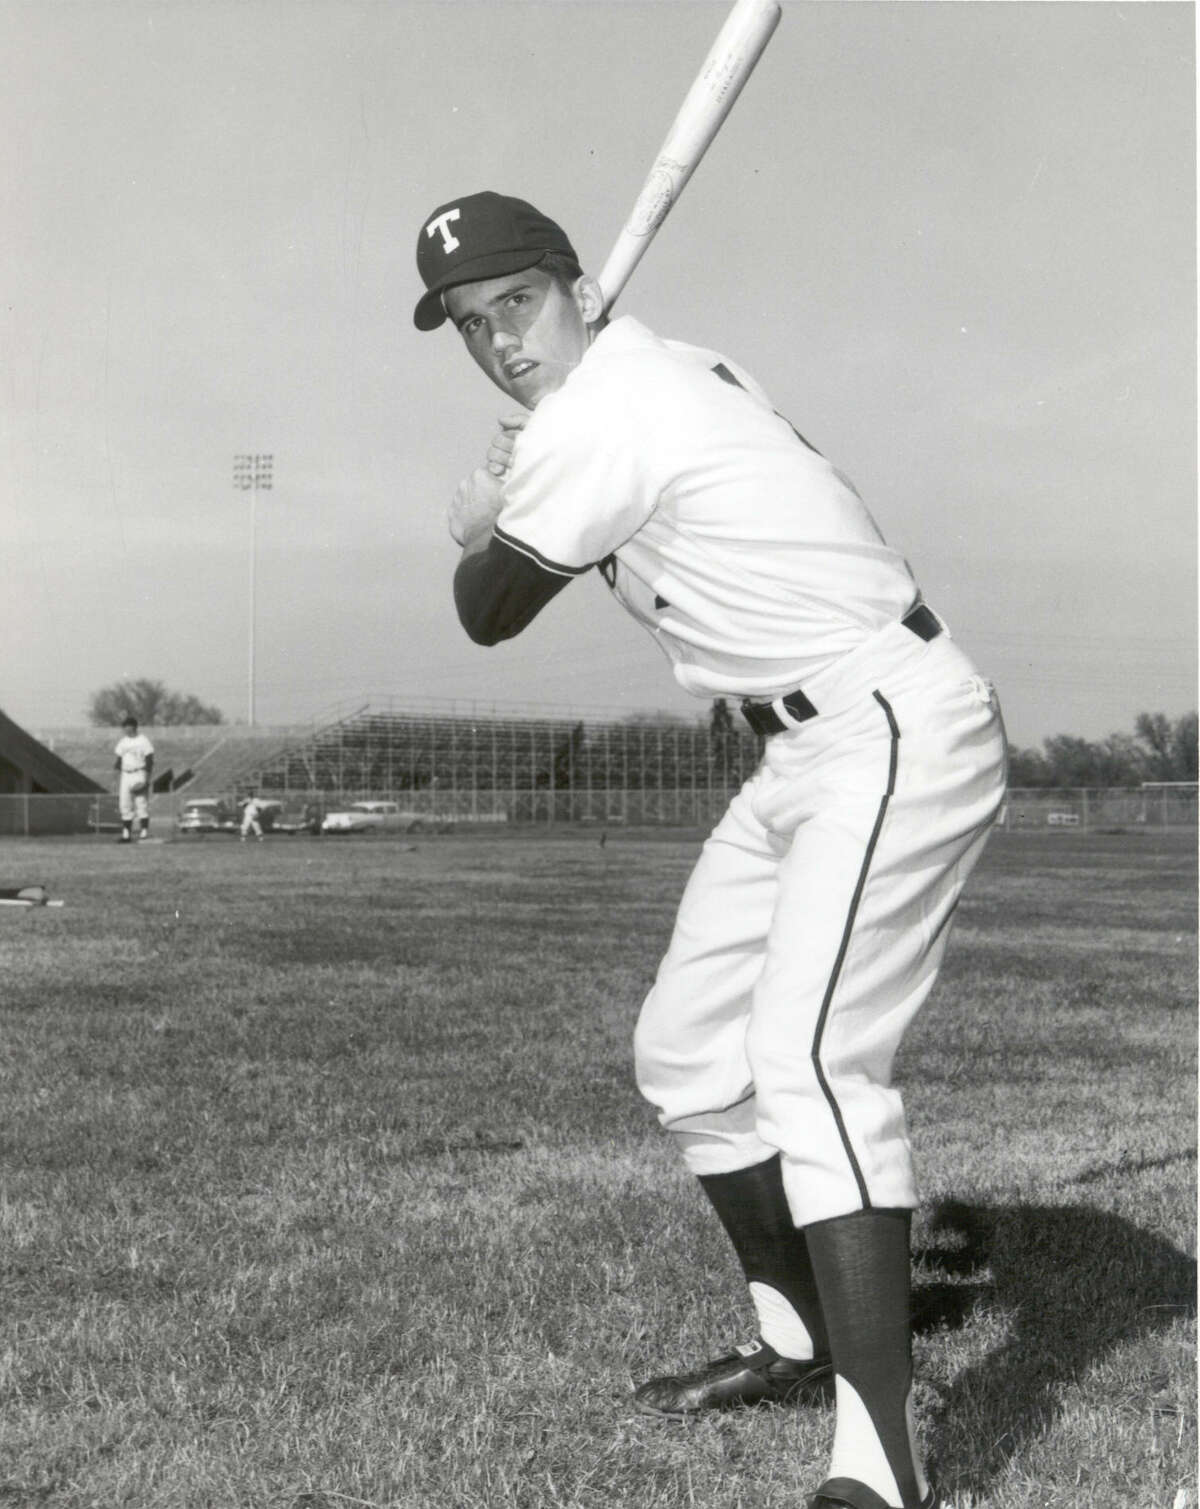 Davey Johnson graduated from Alamo Heights High School and played for Texas A&M for one year before signing with the Baltimore Orioles. Johnson won three World Series rings, was a four time All-Star and won three Gold Gloves for his play at second base